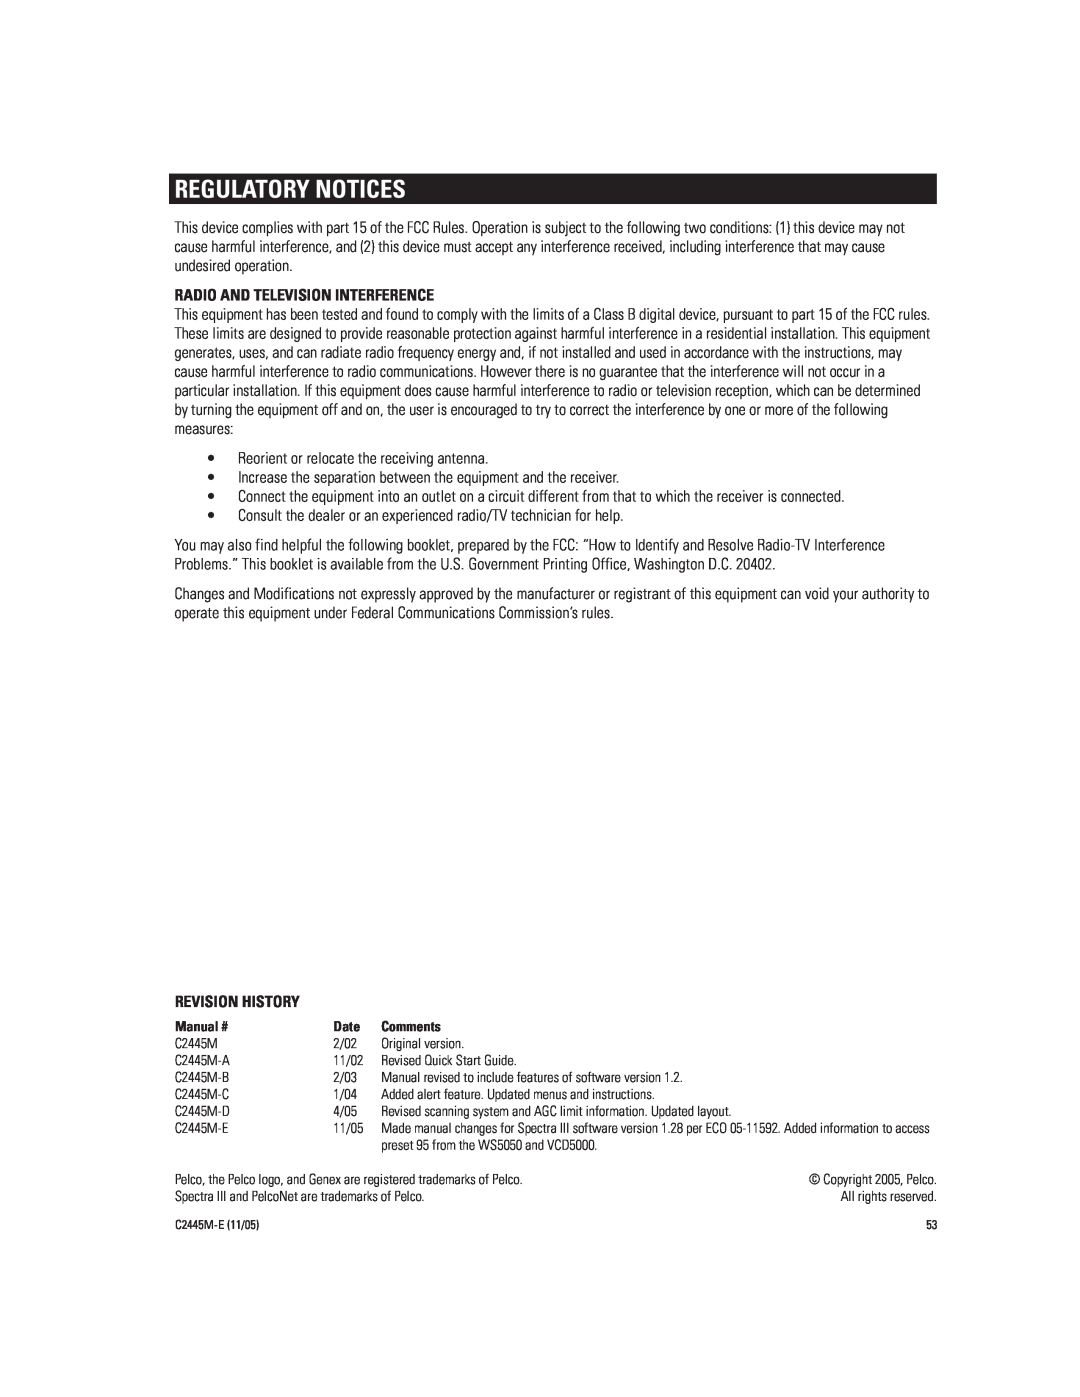 Pelco DD53CBW-X manual Regulatory Notices, Radio And Television Interference, Revision History 